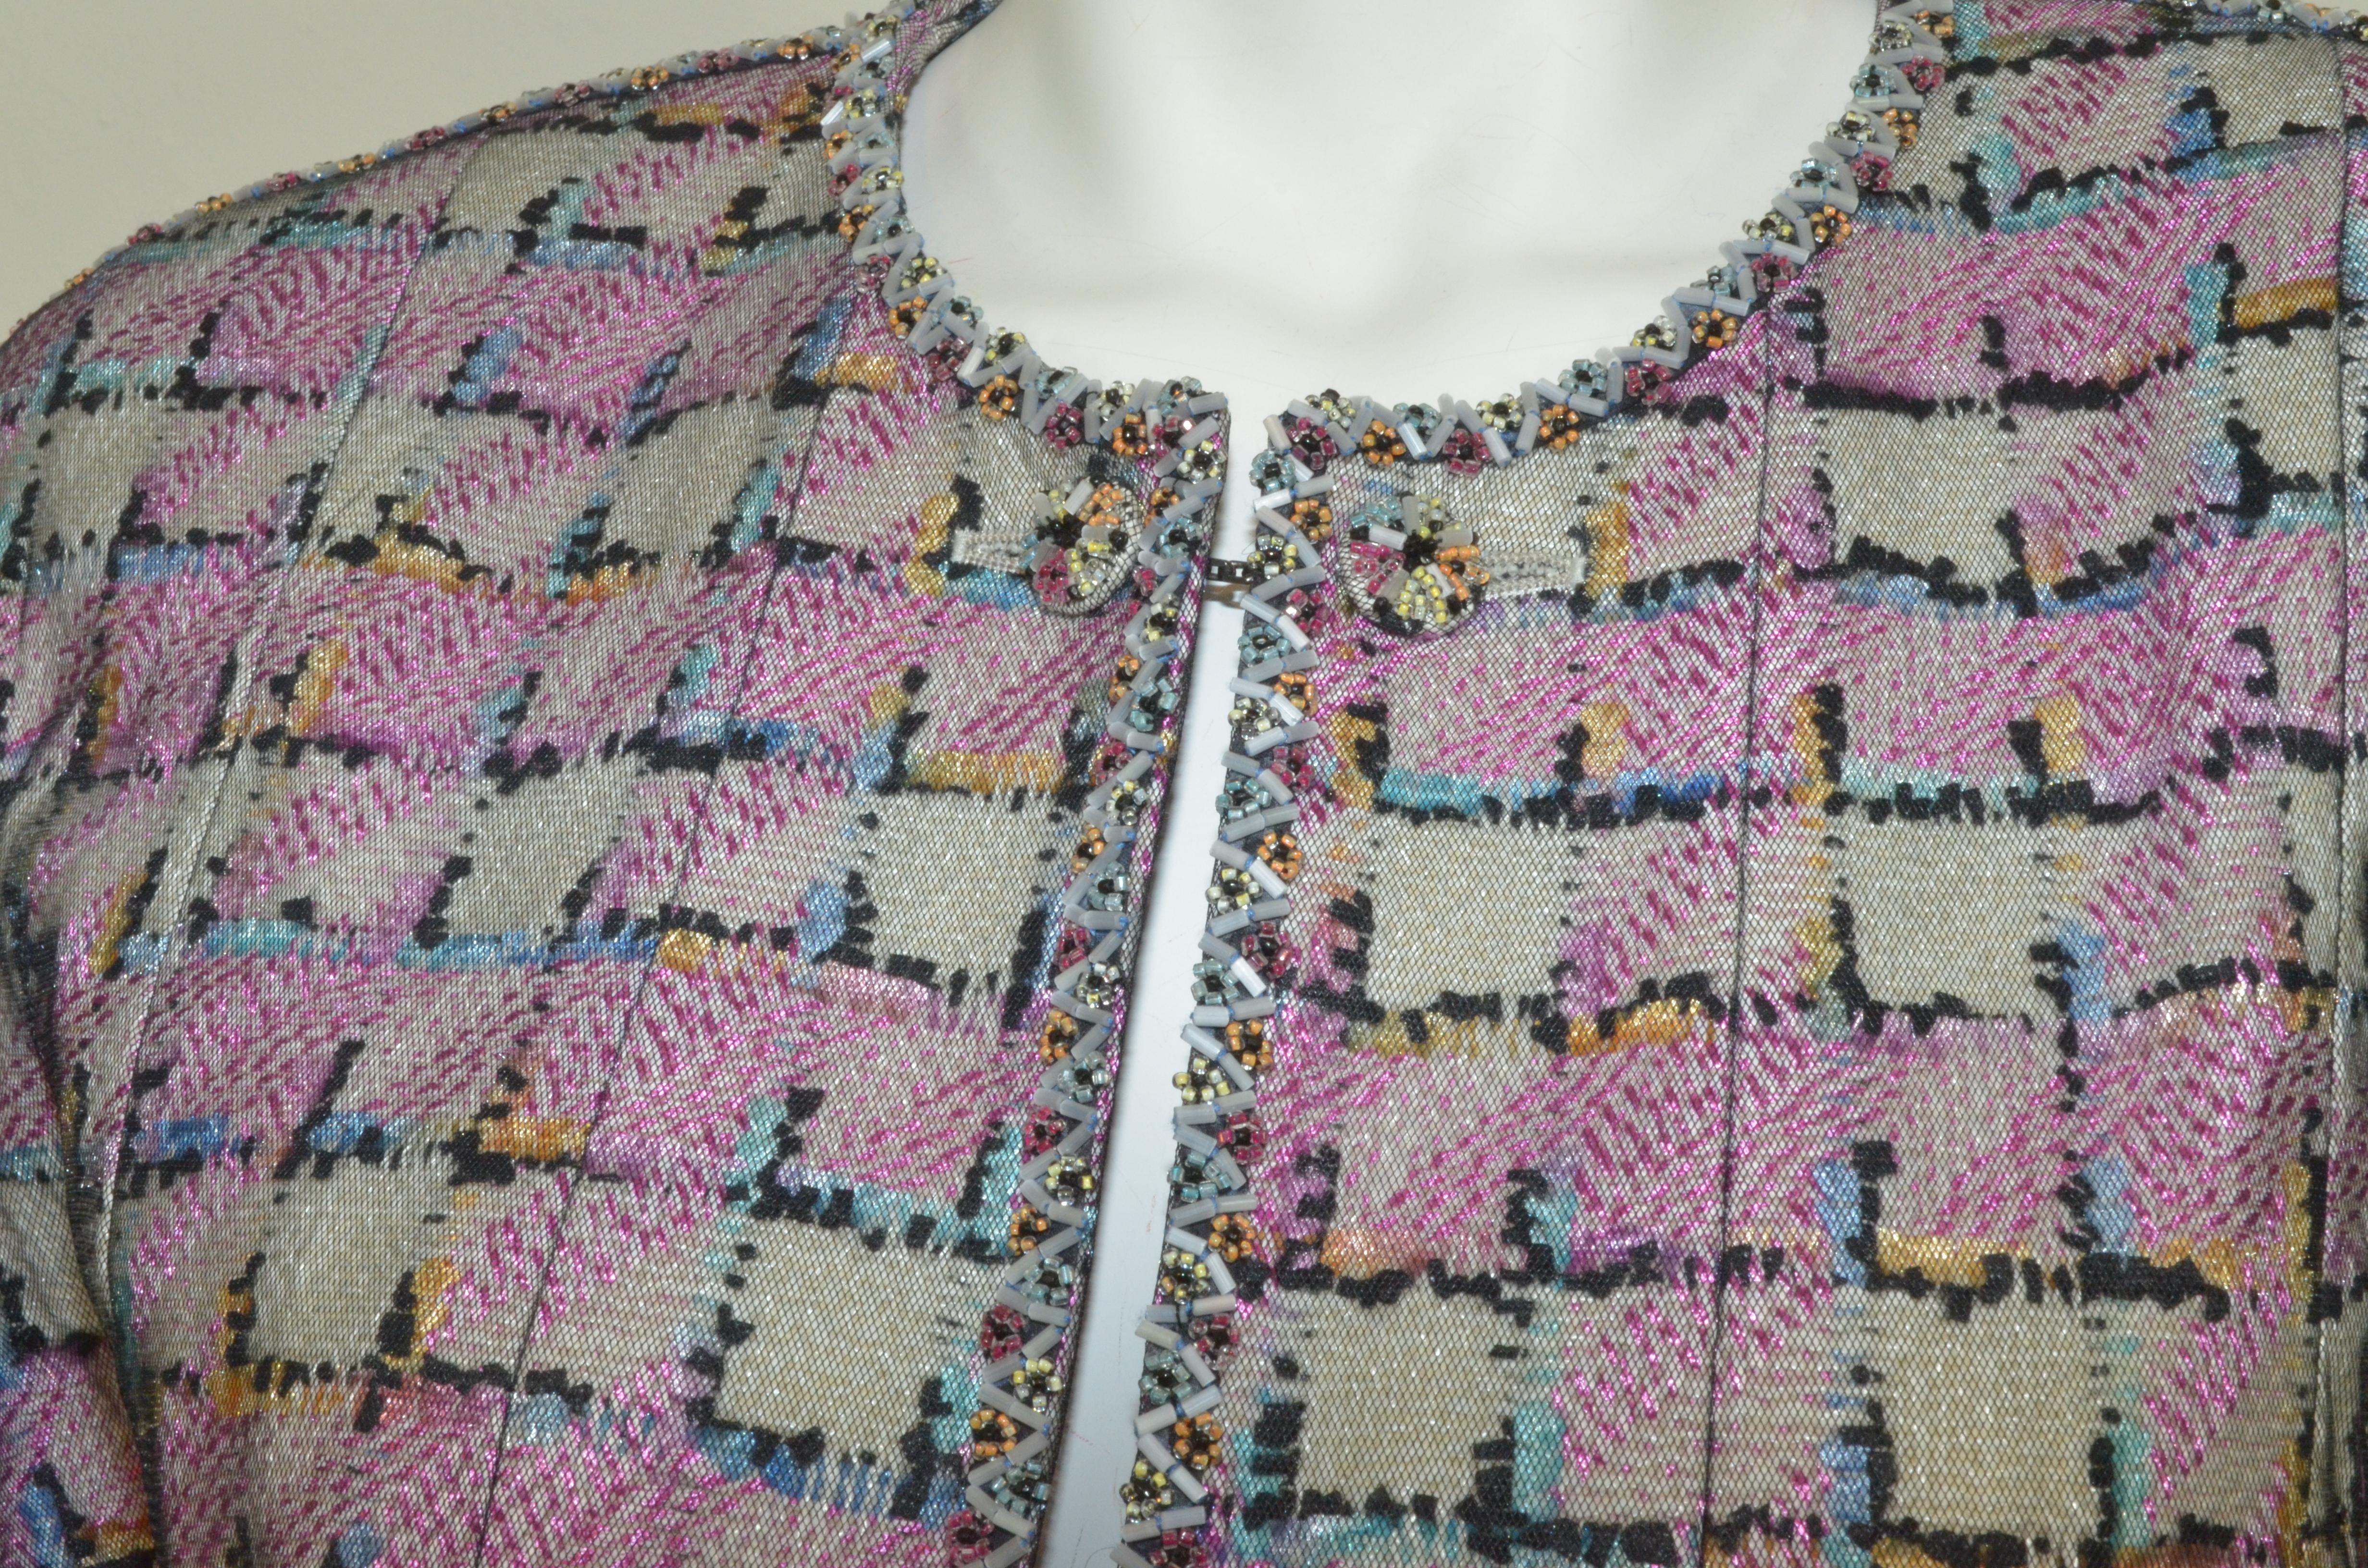 Vintage Chanel jacket features a multicolored design with a black mesh overlay. Jacket has a flower bead-embellished trim, chain button closure, and full lining. Labeled size 44, made in France.

Measurements:

Bust – 40”
Sleeves – 25”
Length – 23”